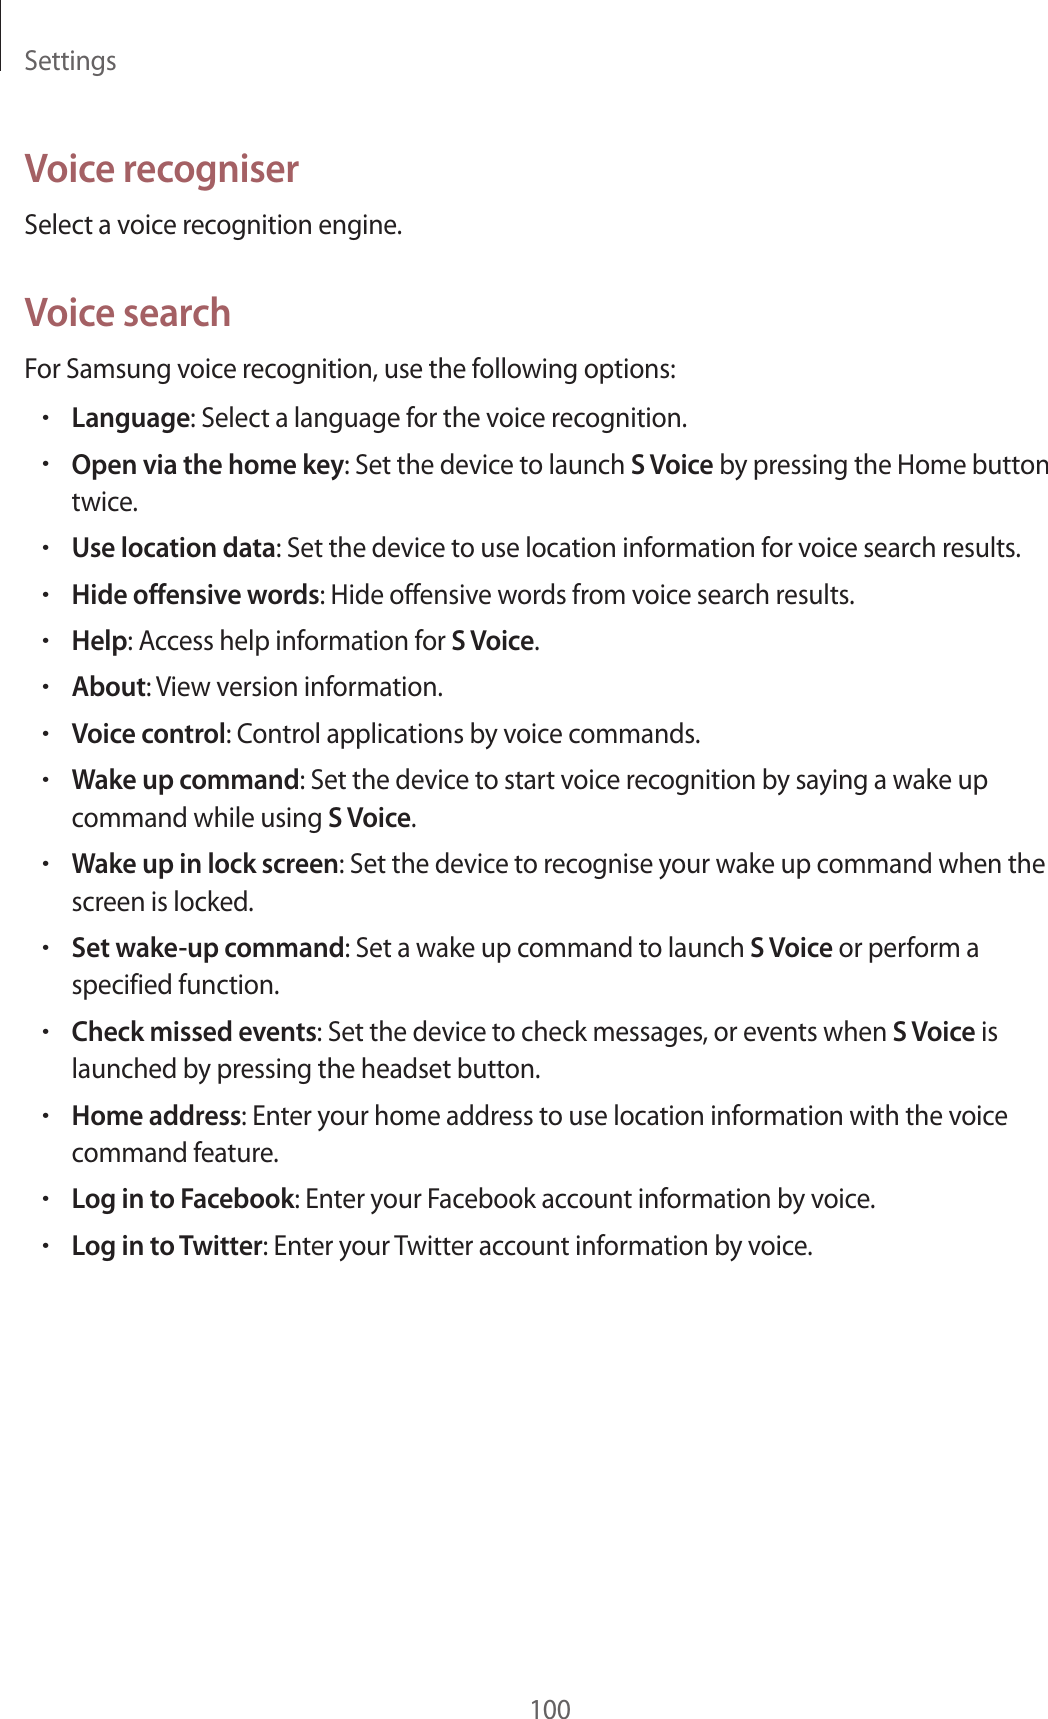 Settings100Voice recogniserSelect a voice recognition engine.Voice searchFor Samsung voice recognition, use the following options:•Language: Select a language for the voice recognition.•Open via the home key: Set the device to launch S Voice by pressing the Home button twice.•Use location data: Set the device to use location information for voice search results.•Hide offensive words: Hide offensive words from voice search results.•Help: Access help information for S Voice.•About: View version information.•Voice control: Control applications by voice commands.•Wake up command: Set the device to start voice recognition by saying a wake up command while using S Voice.•Wake up in lock screen: Set the device to recognise your wake up command when the screen is locked.•Set wake-up command: Set a wake up command to launch S Voice or perform a specified function.•Check missed events: Set the device to check messages, or events when S Voice is launched by pressing the headset button.•Home address: Enter your home address to use location information with the voice command feature.•Log in to Facebook: Enter your Facebook account information by voice.•Log in to Twitter: Enter your Twitter account information by voice.